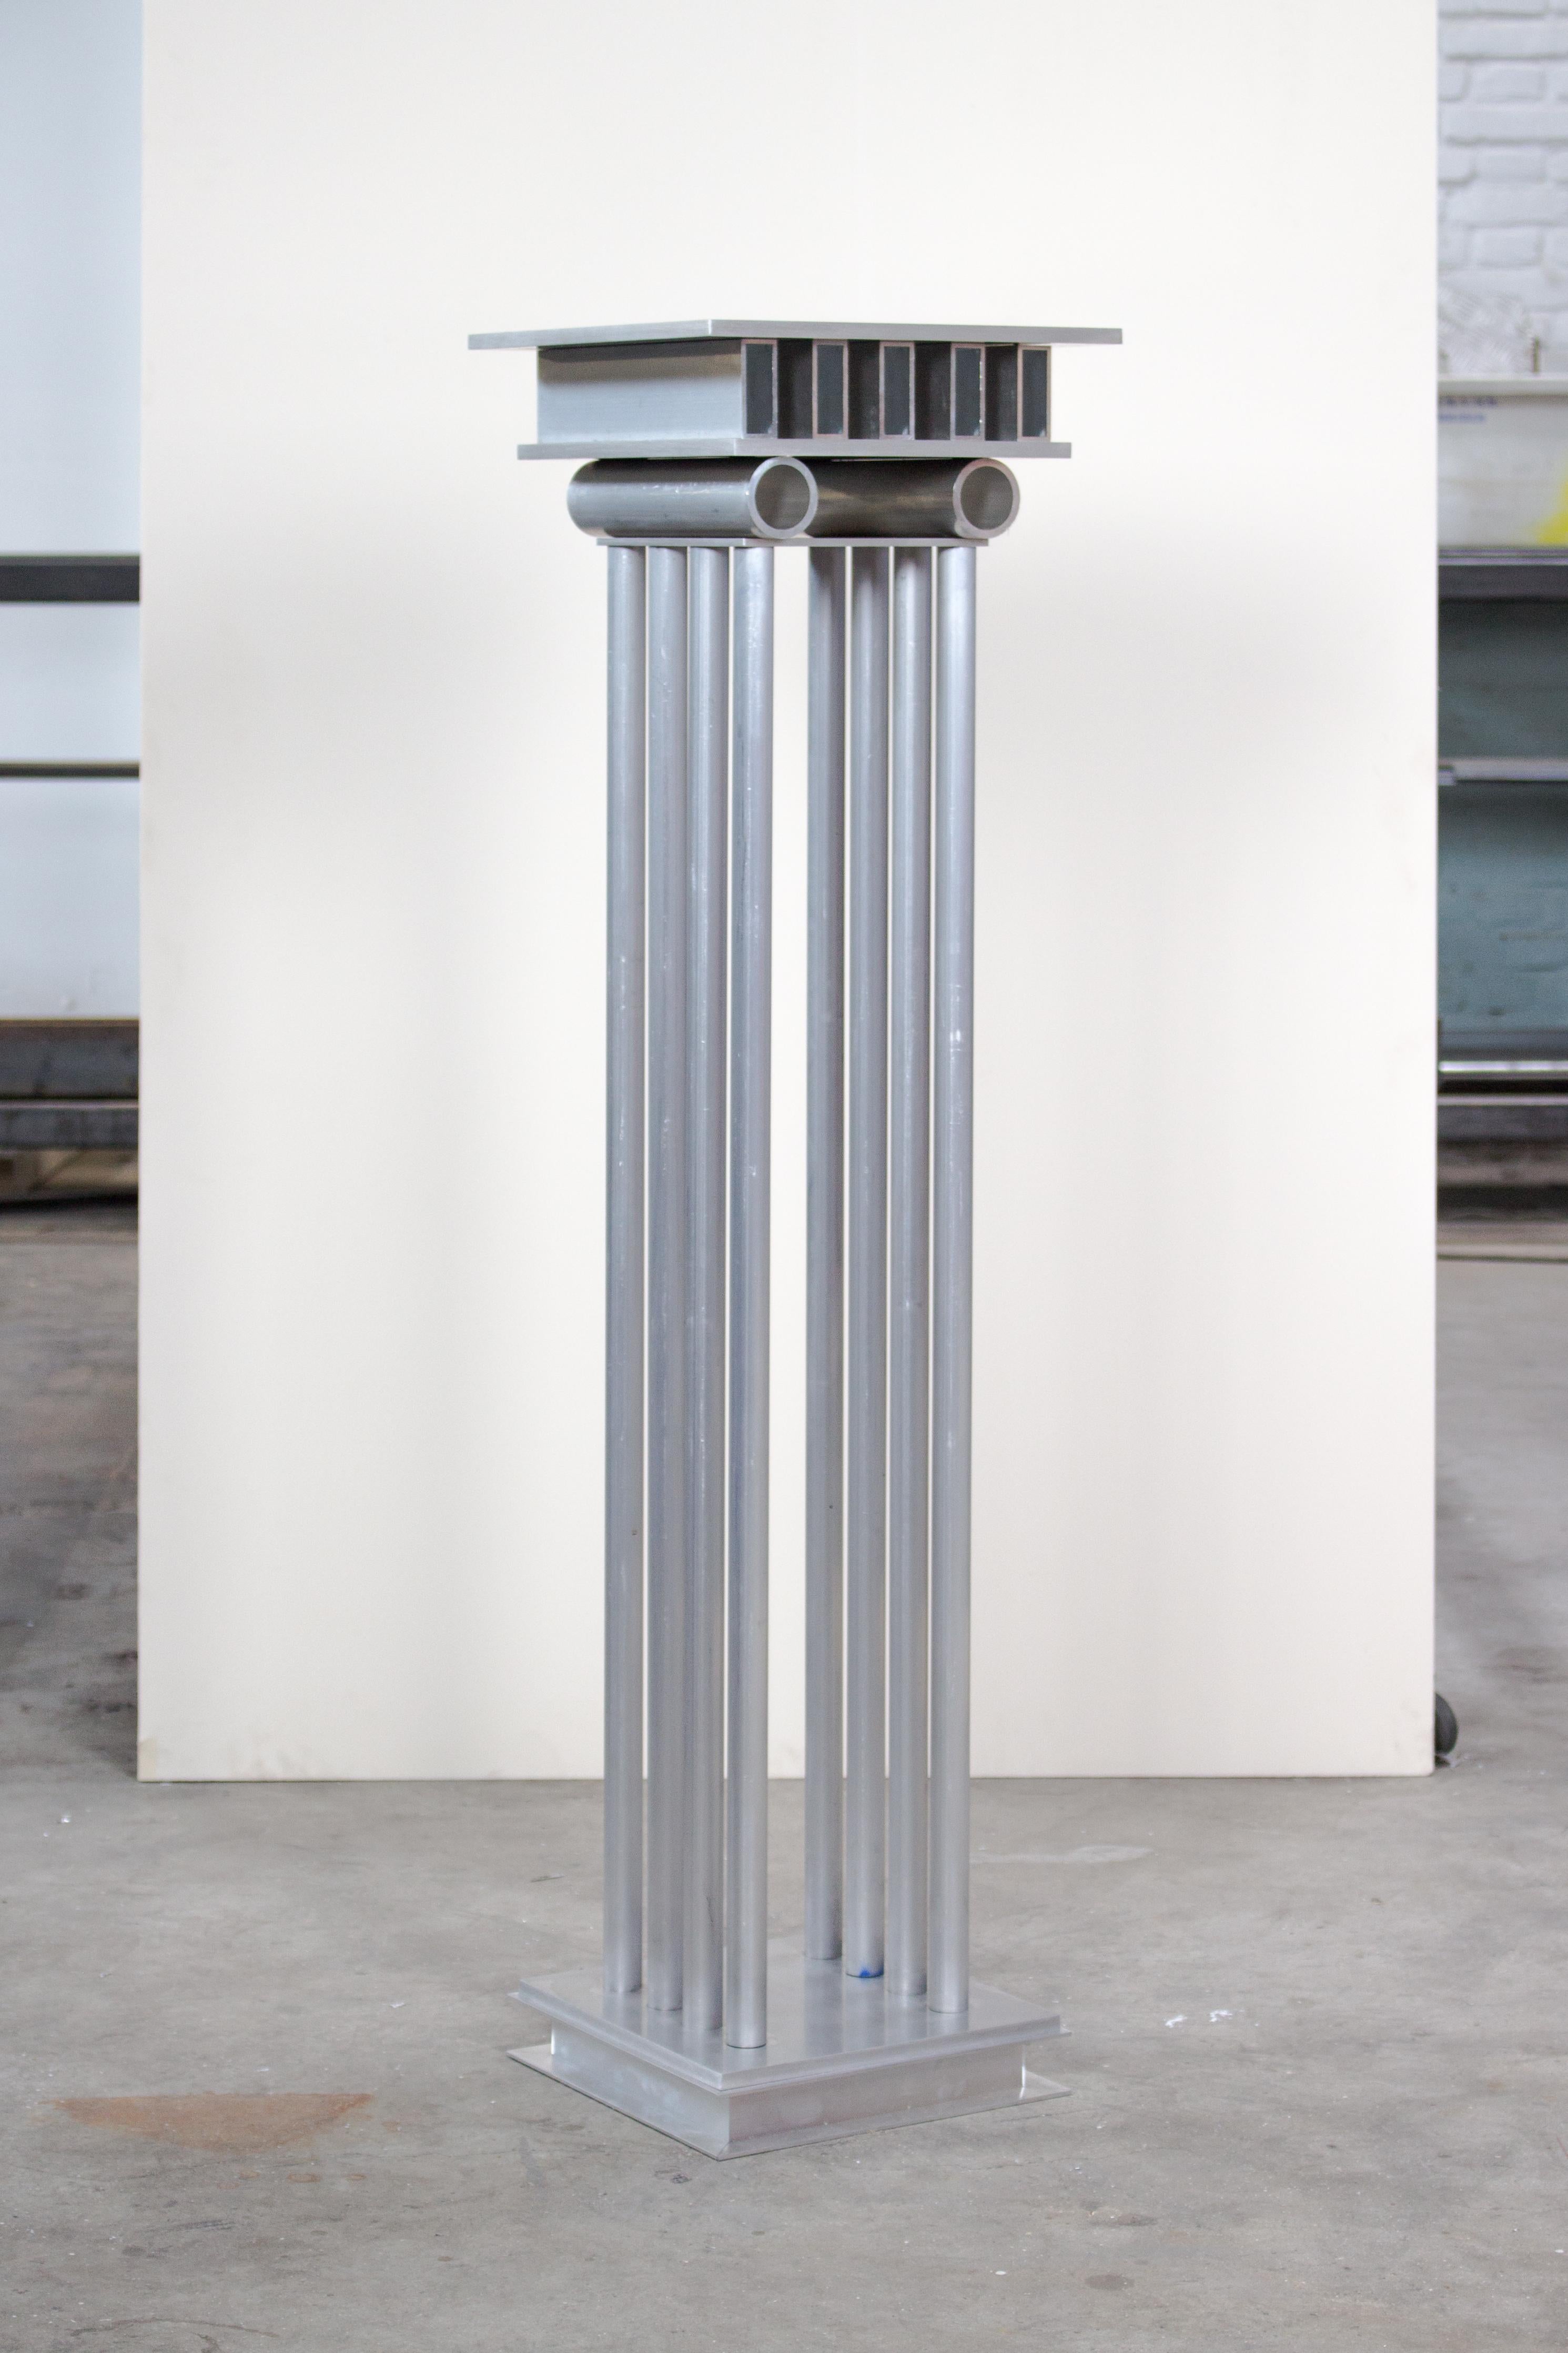 Metope Column by Joachim-Morineau Studio
Limited Edition of 8
Dimensions: H 110 x D 30 x W 30 cm, 18 kg
Materials: Aluminium tubes, profiles, screws and sheets
Possibility to have a different colour/finish (such as blasted or anodized